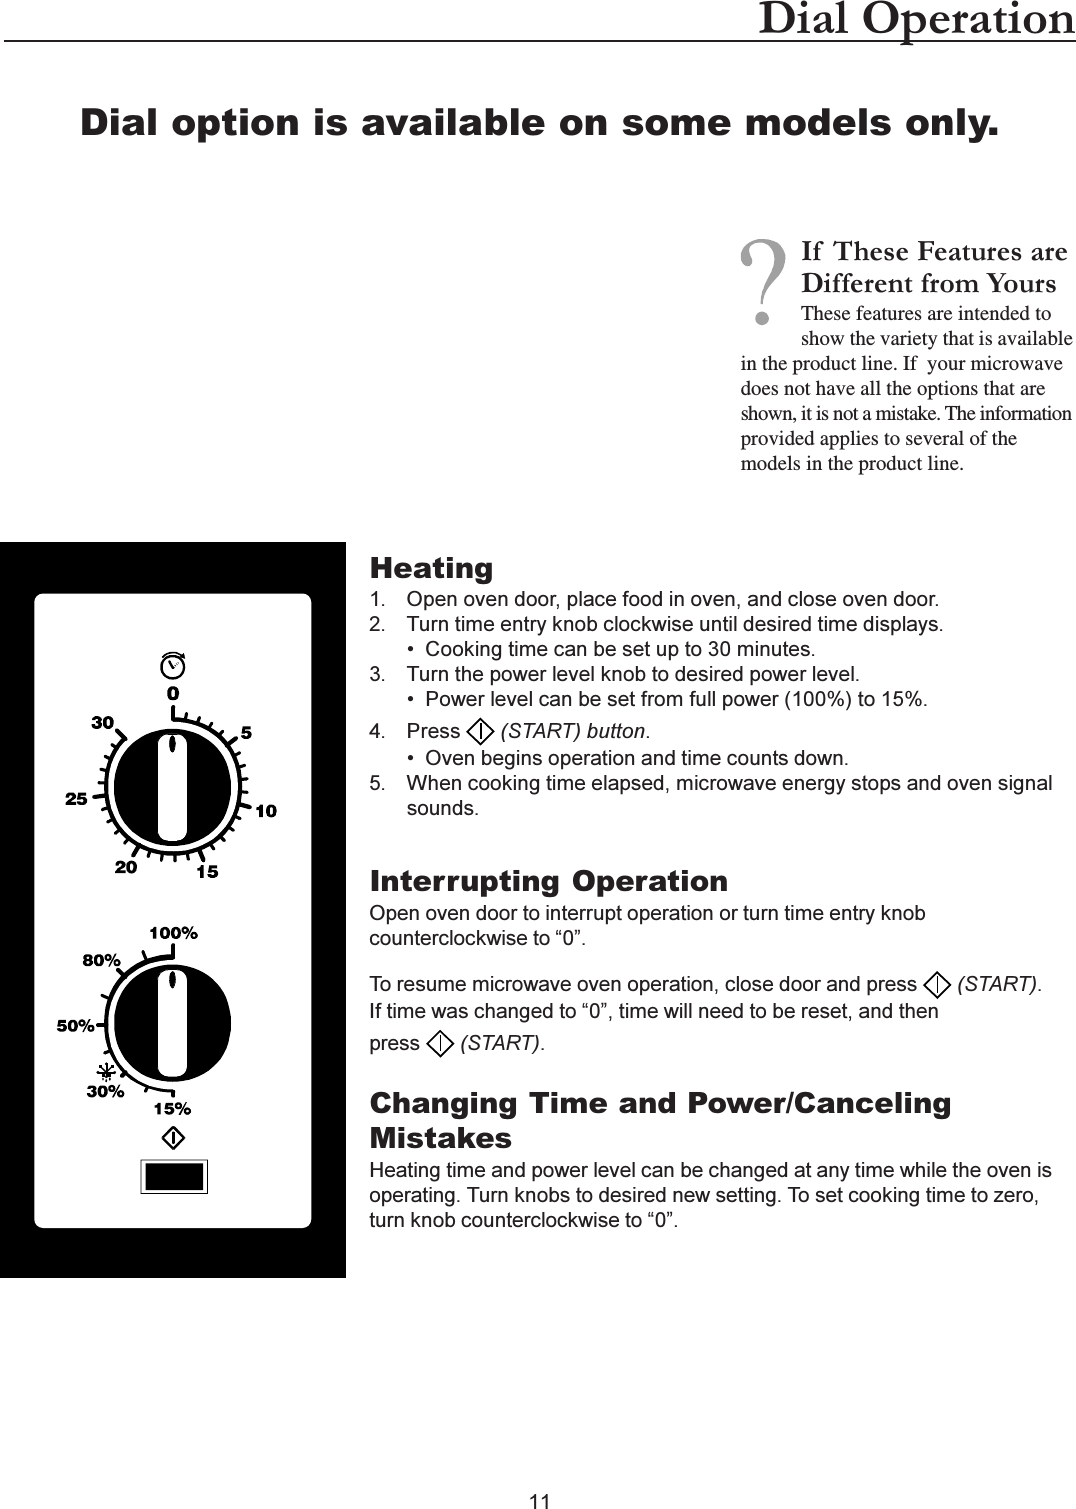 11Dial OperationHeating1. Open oven door, place food in oven, and close oven door.2. Turn time entry knob clockwise until desired time displays. Cooking time can be set up to 30 minutes.3. Turn the power level knob to desired power level. Power level can be set from full power (100%) to 15%.4. Press   (START) button. Oven begins operation and time counts down.5. When cooking time elapsed, microwave energy stops and oven signalsounds.Interrupting OperationOpen oven door to interrupt operation or turn time entry knobcounterclockwise to 0.To resume microwave oven operation, close door and press   (START).If time was changed to 0, time will need to be reset, and thenpress   (START).Changing Time and Power/CancelingMistakesHeating time and power level can be changed at any time while the oven isoperating. Turn knobs to desired new setting. To set cooking time to zero,turn knob counterclockwise to 0.Dial option is available on some models only.If  These Features areDifferent from YoursThese features are intended toshow the variety that is availablein the product line. If  your microwavedoes not have all the options that areshown, it is not a mistake. The informationprovided applies to several of themodels in the product line.